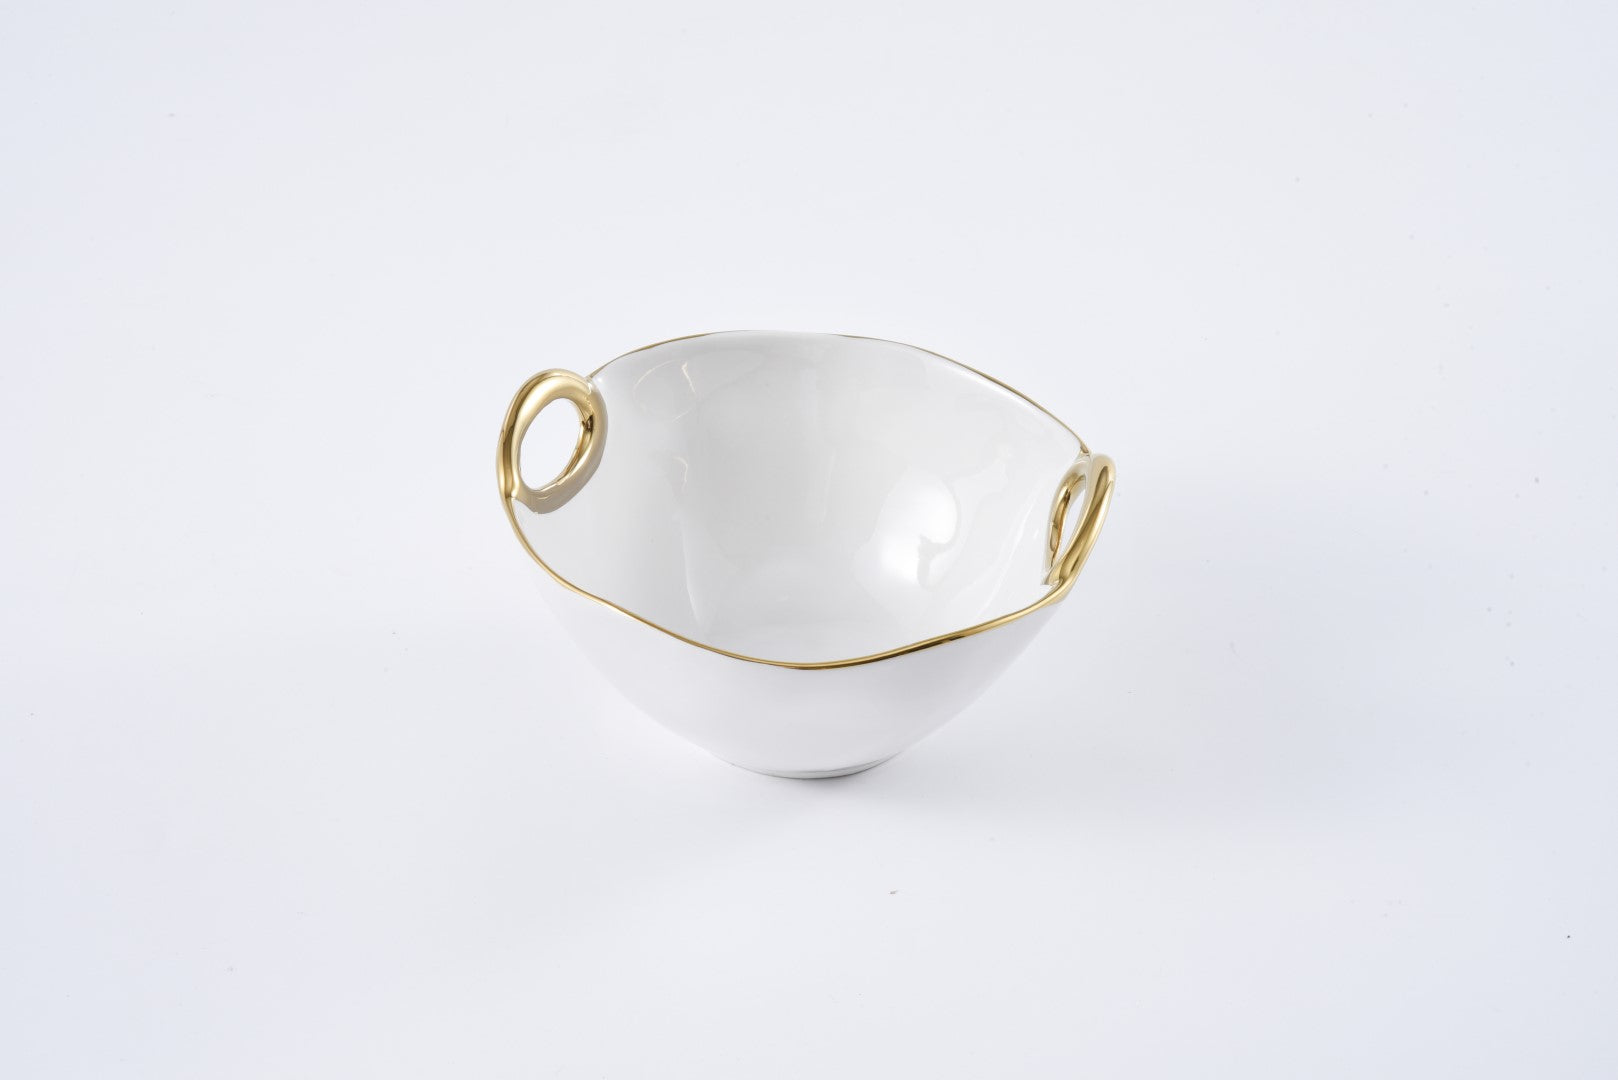 Ceramic Round Bowl With Gold Handles